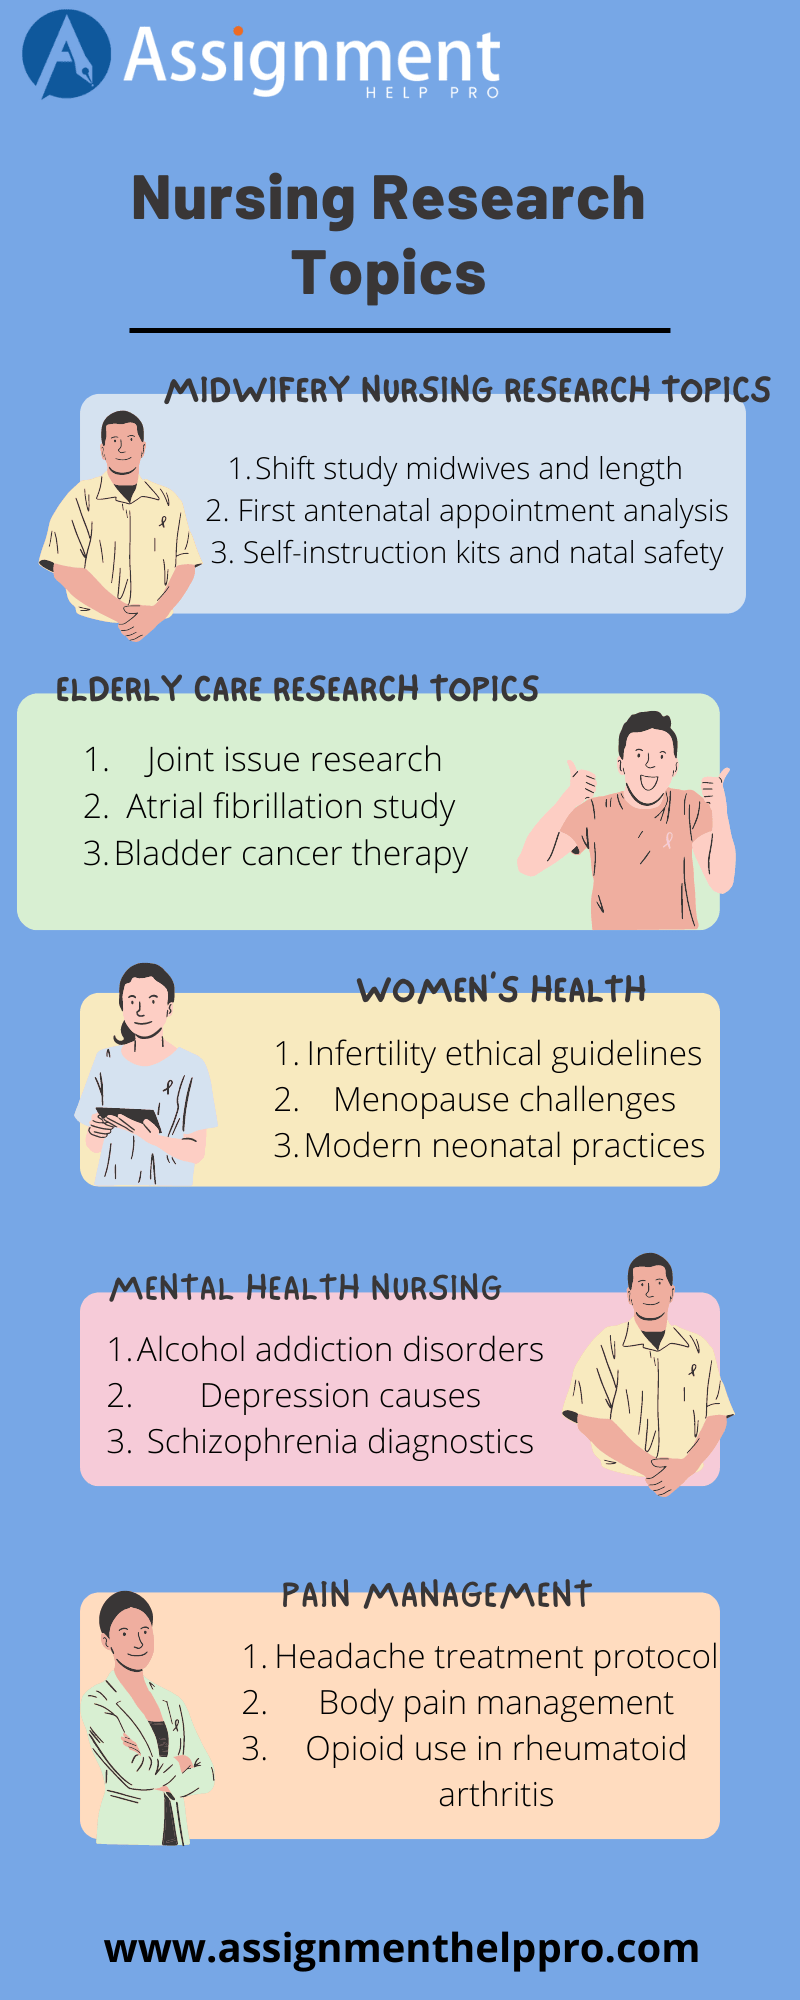 health research topics for nursing students